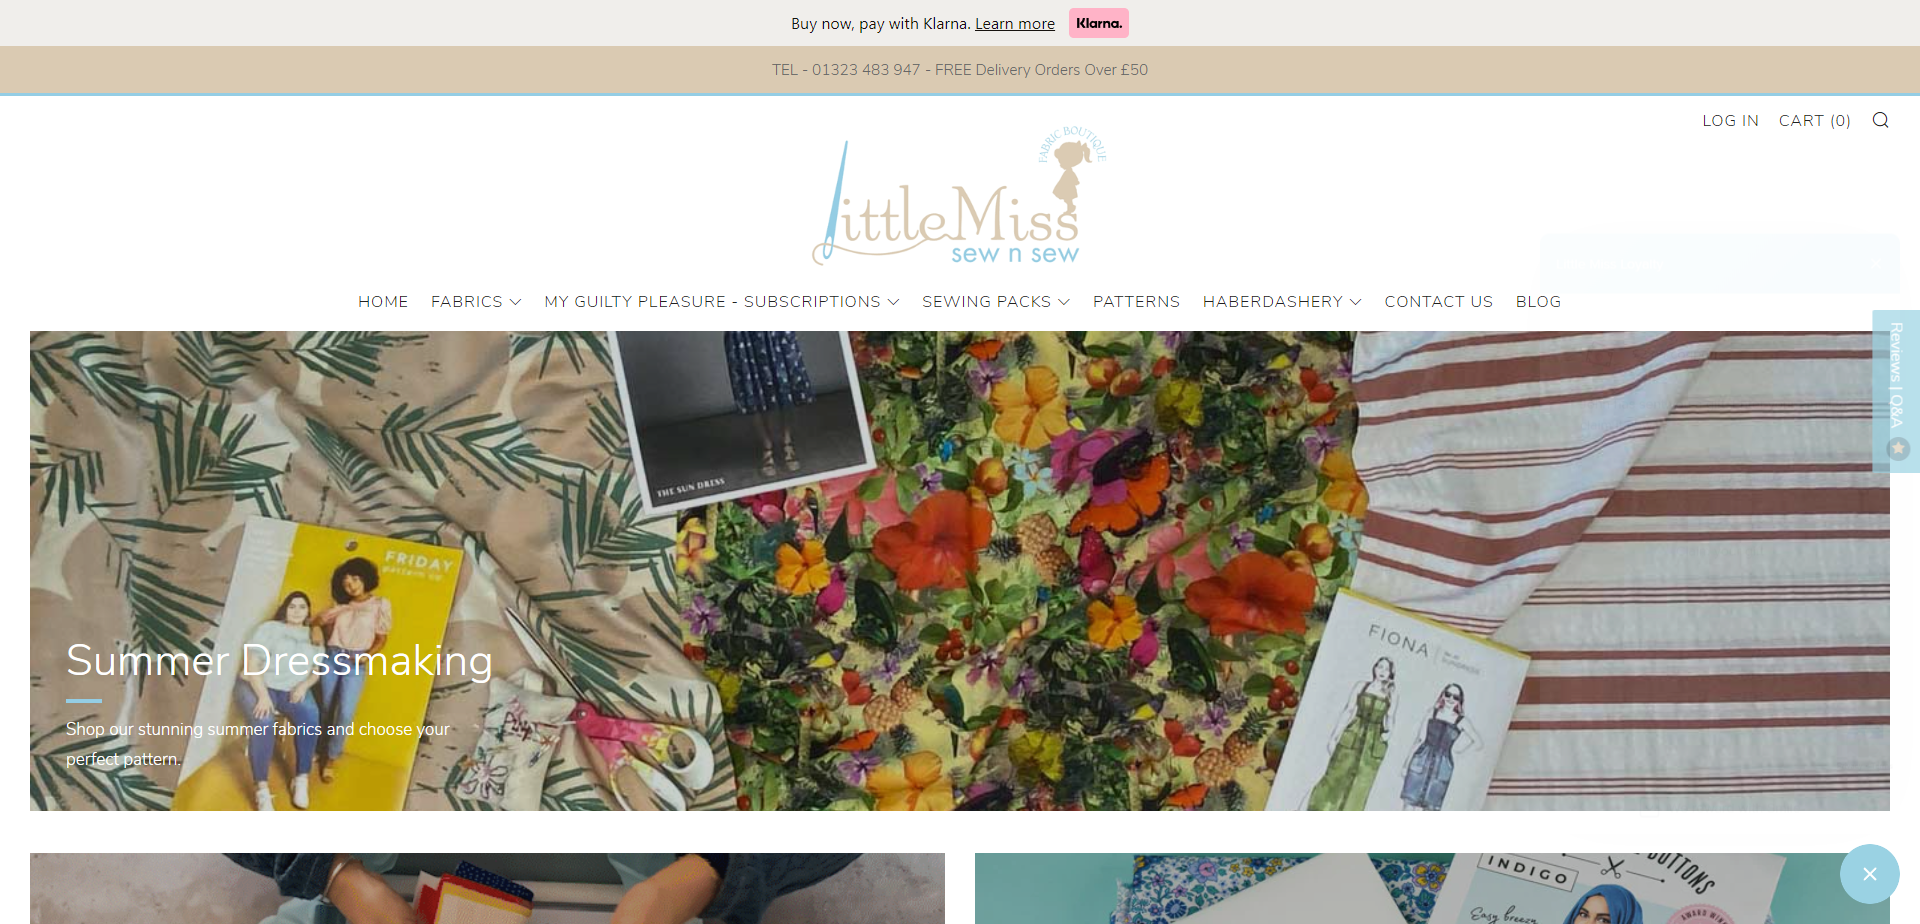 Referral Landing Page for Little Miss Sew n Sew